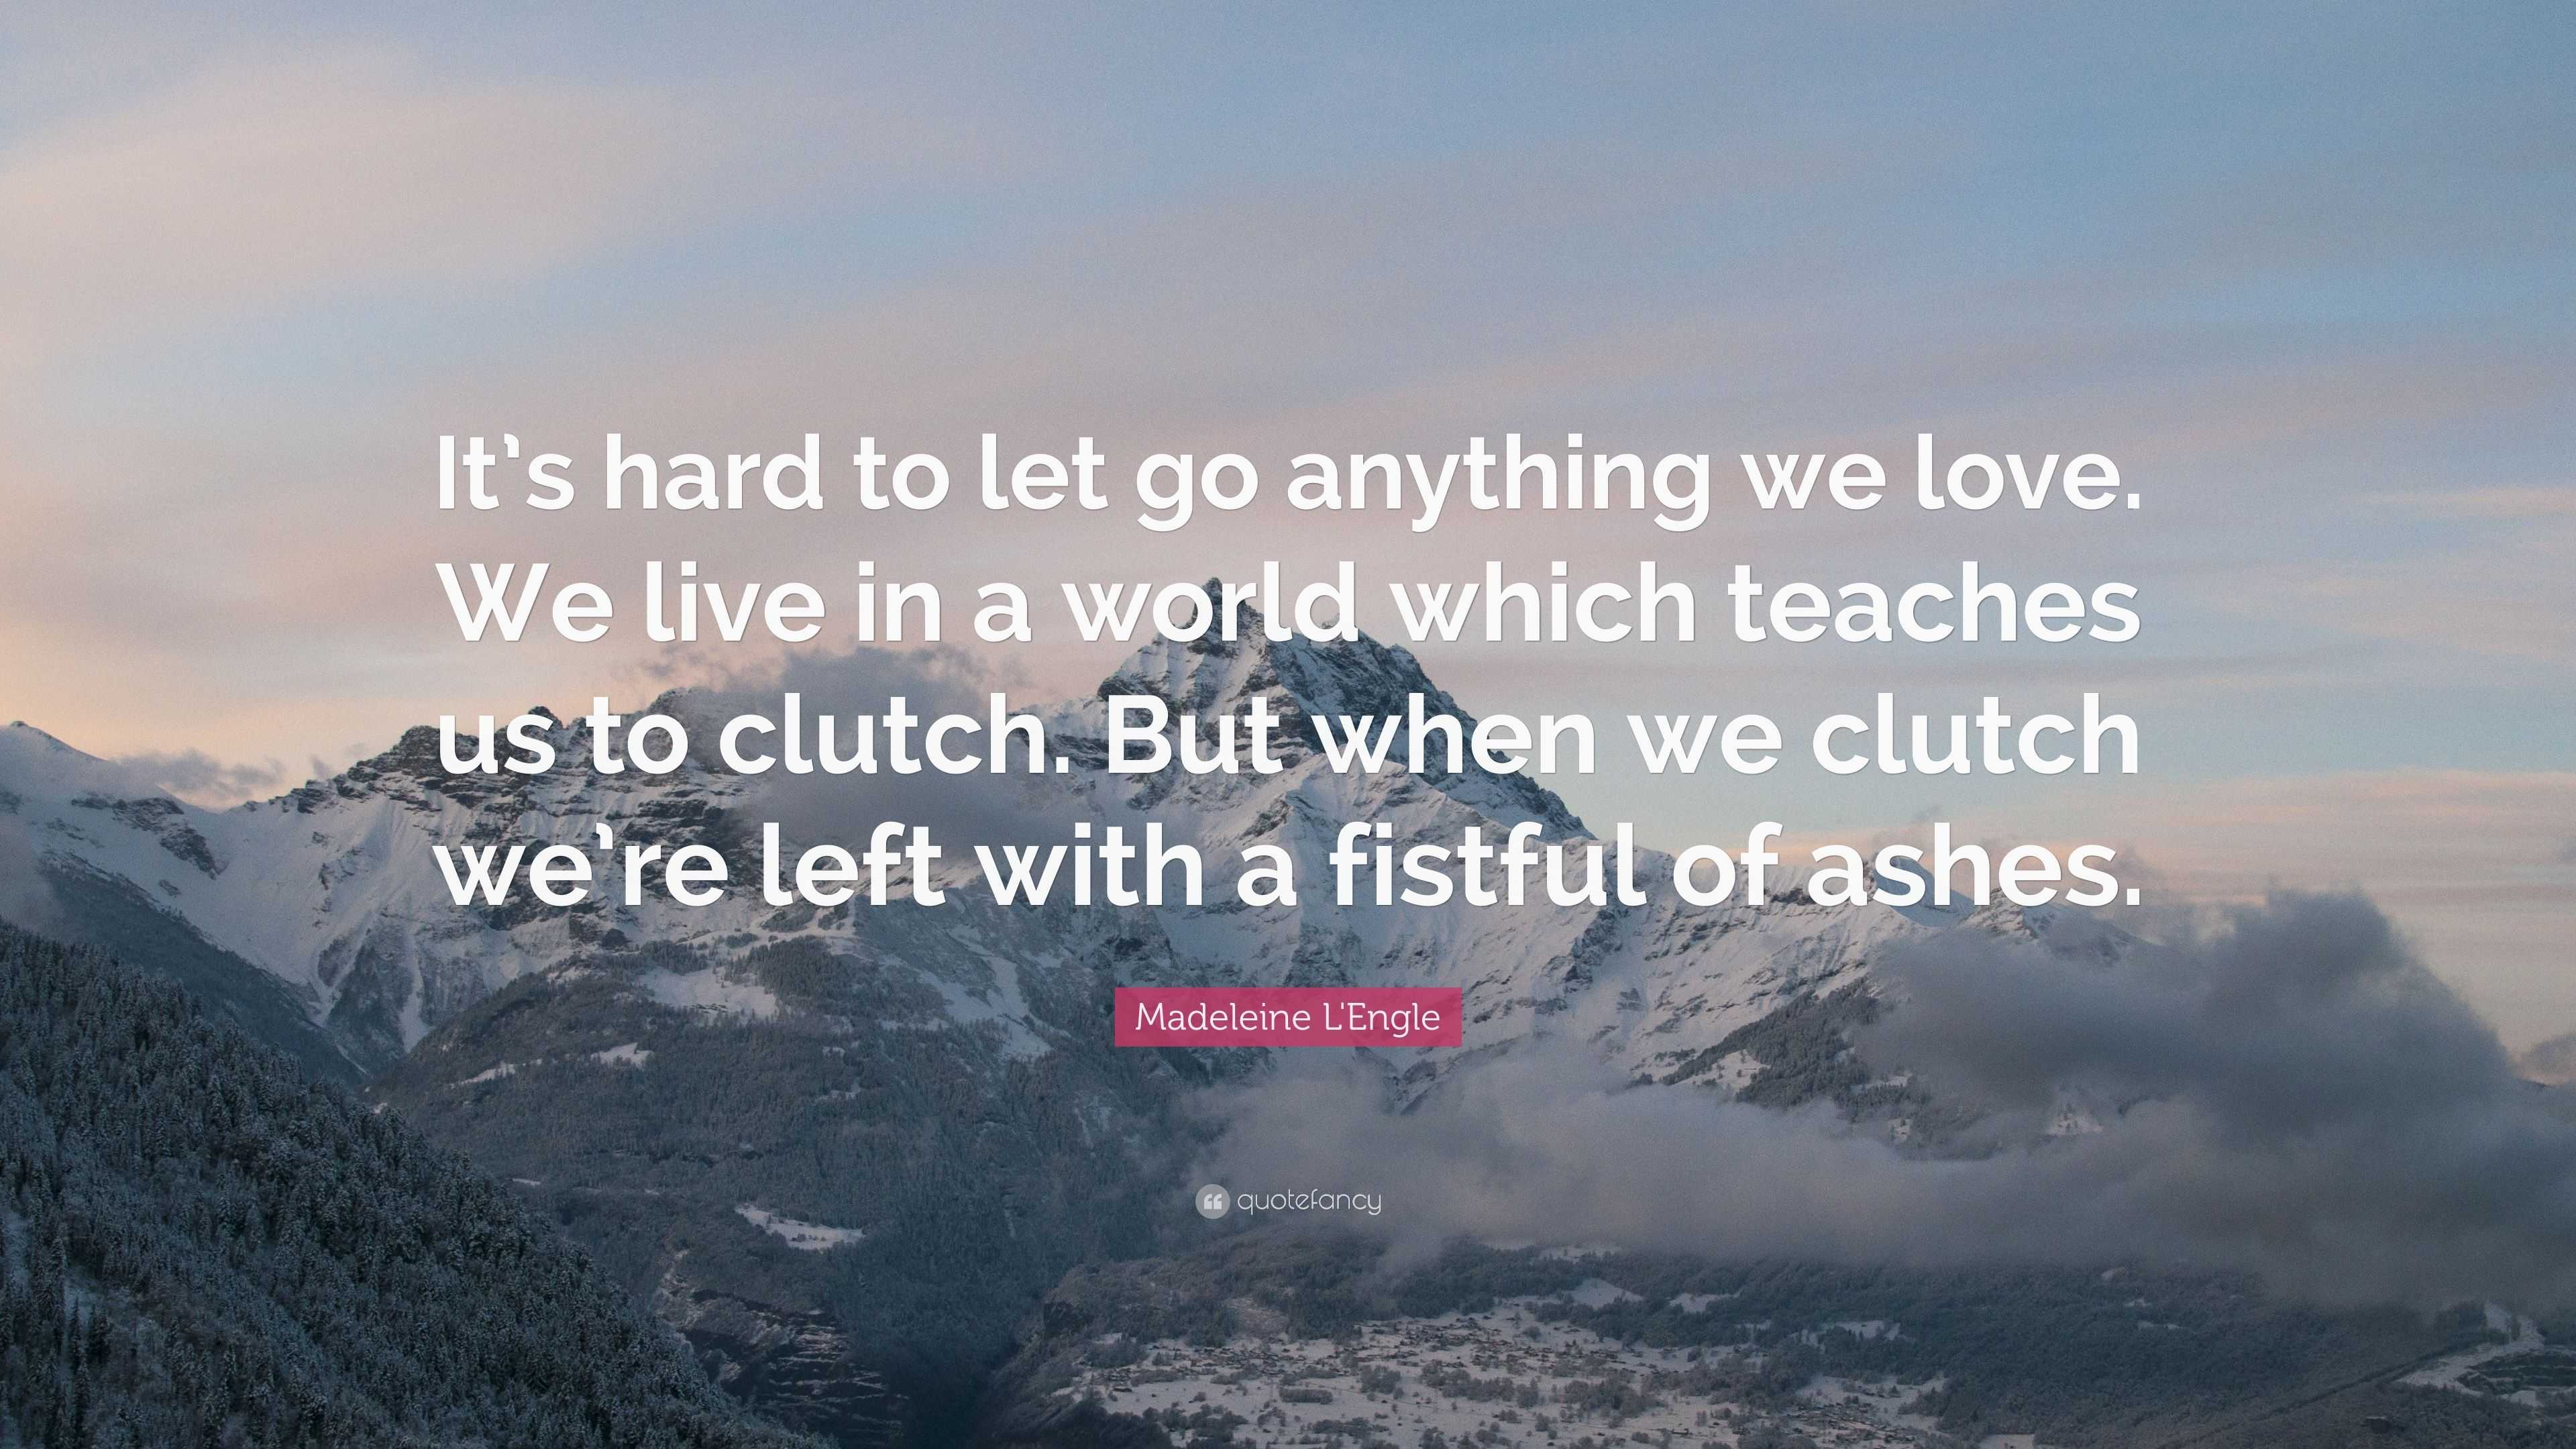 Madeleine L'Engle Quote: “It’s hard to let go anything we love. We live ...